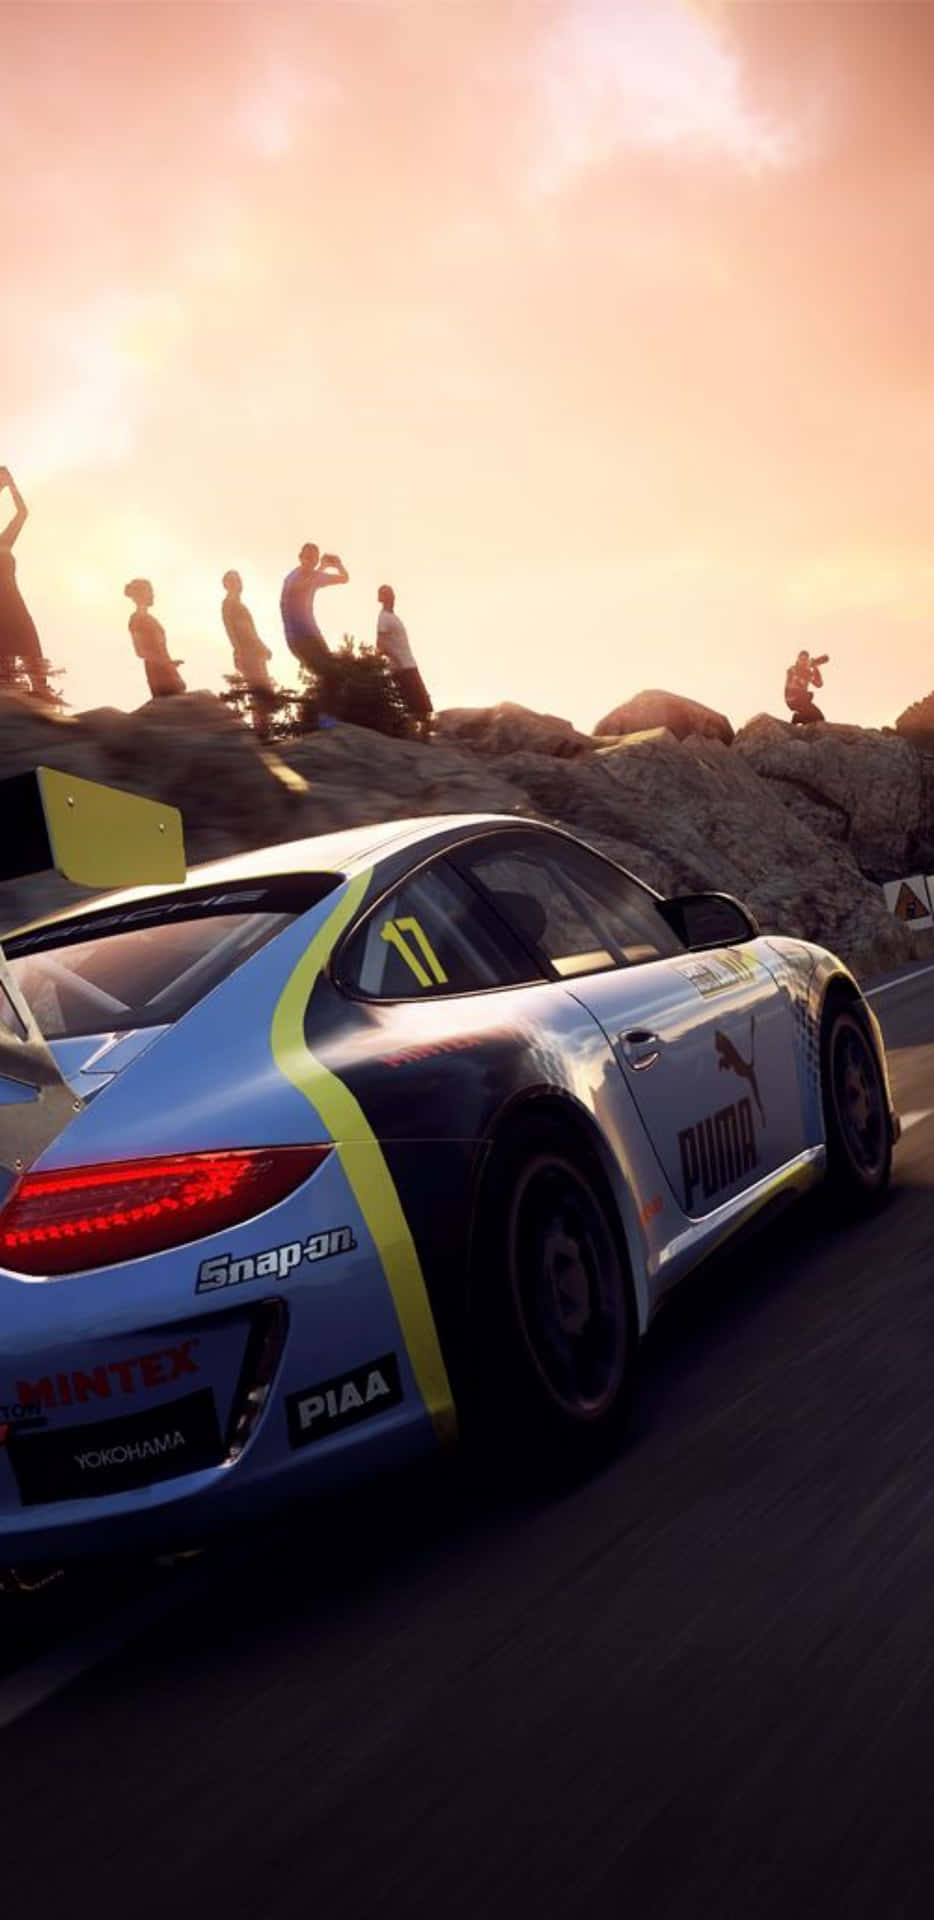 Conquer the Dirt Rally racing course with the Pixel 3xl